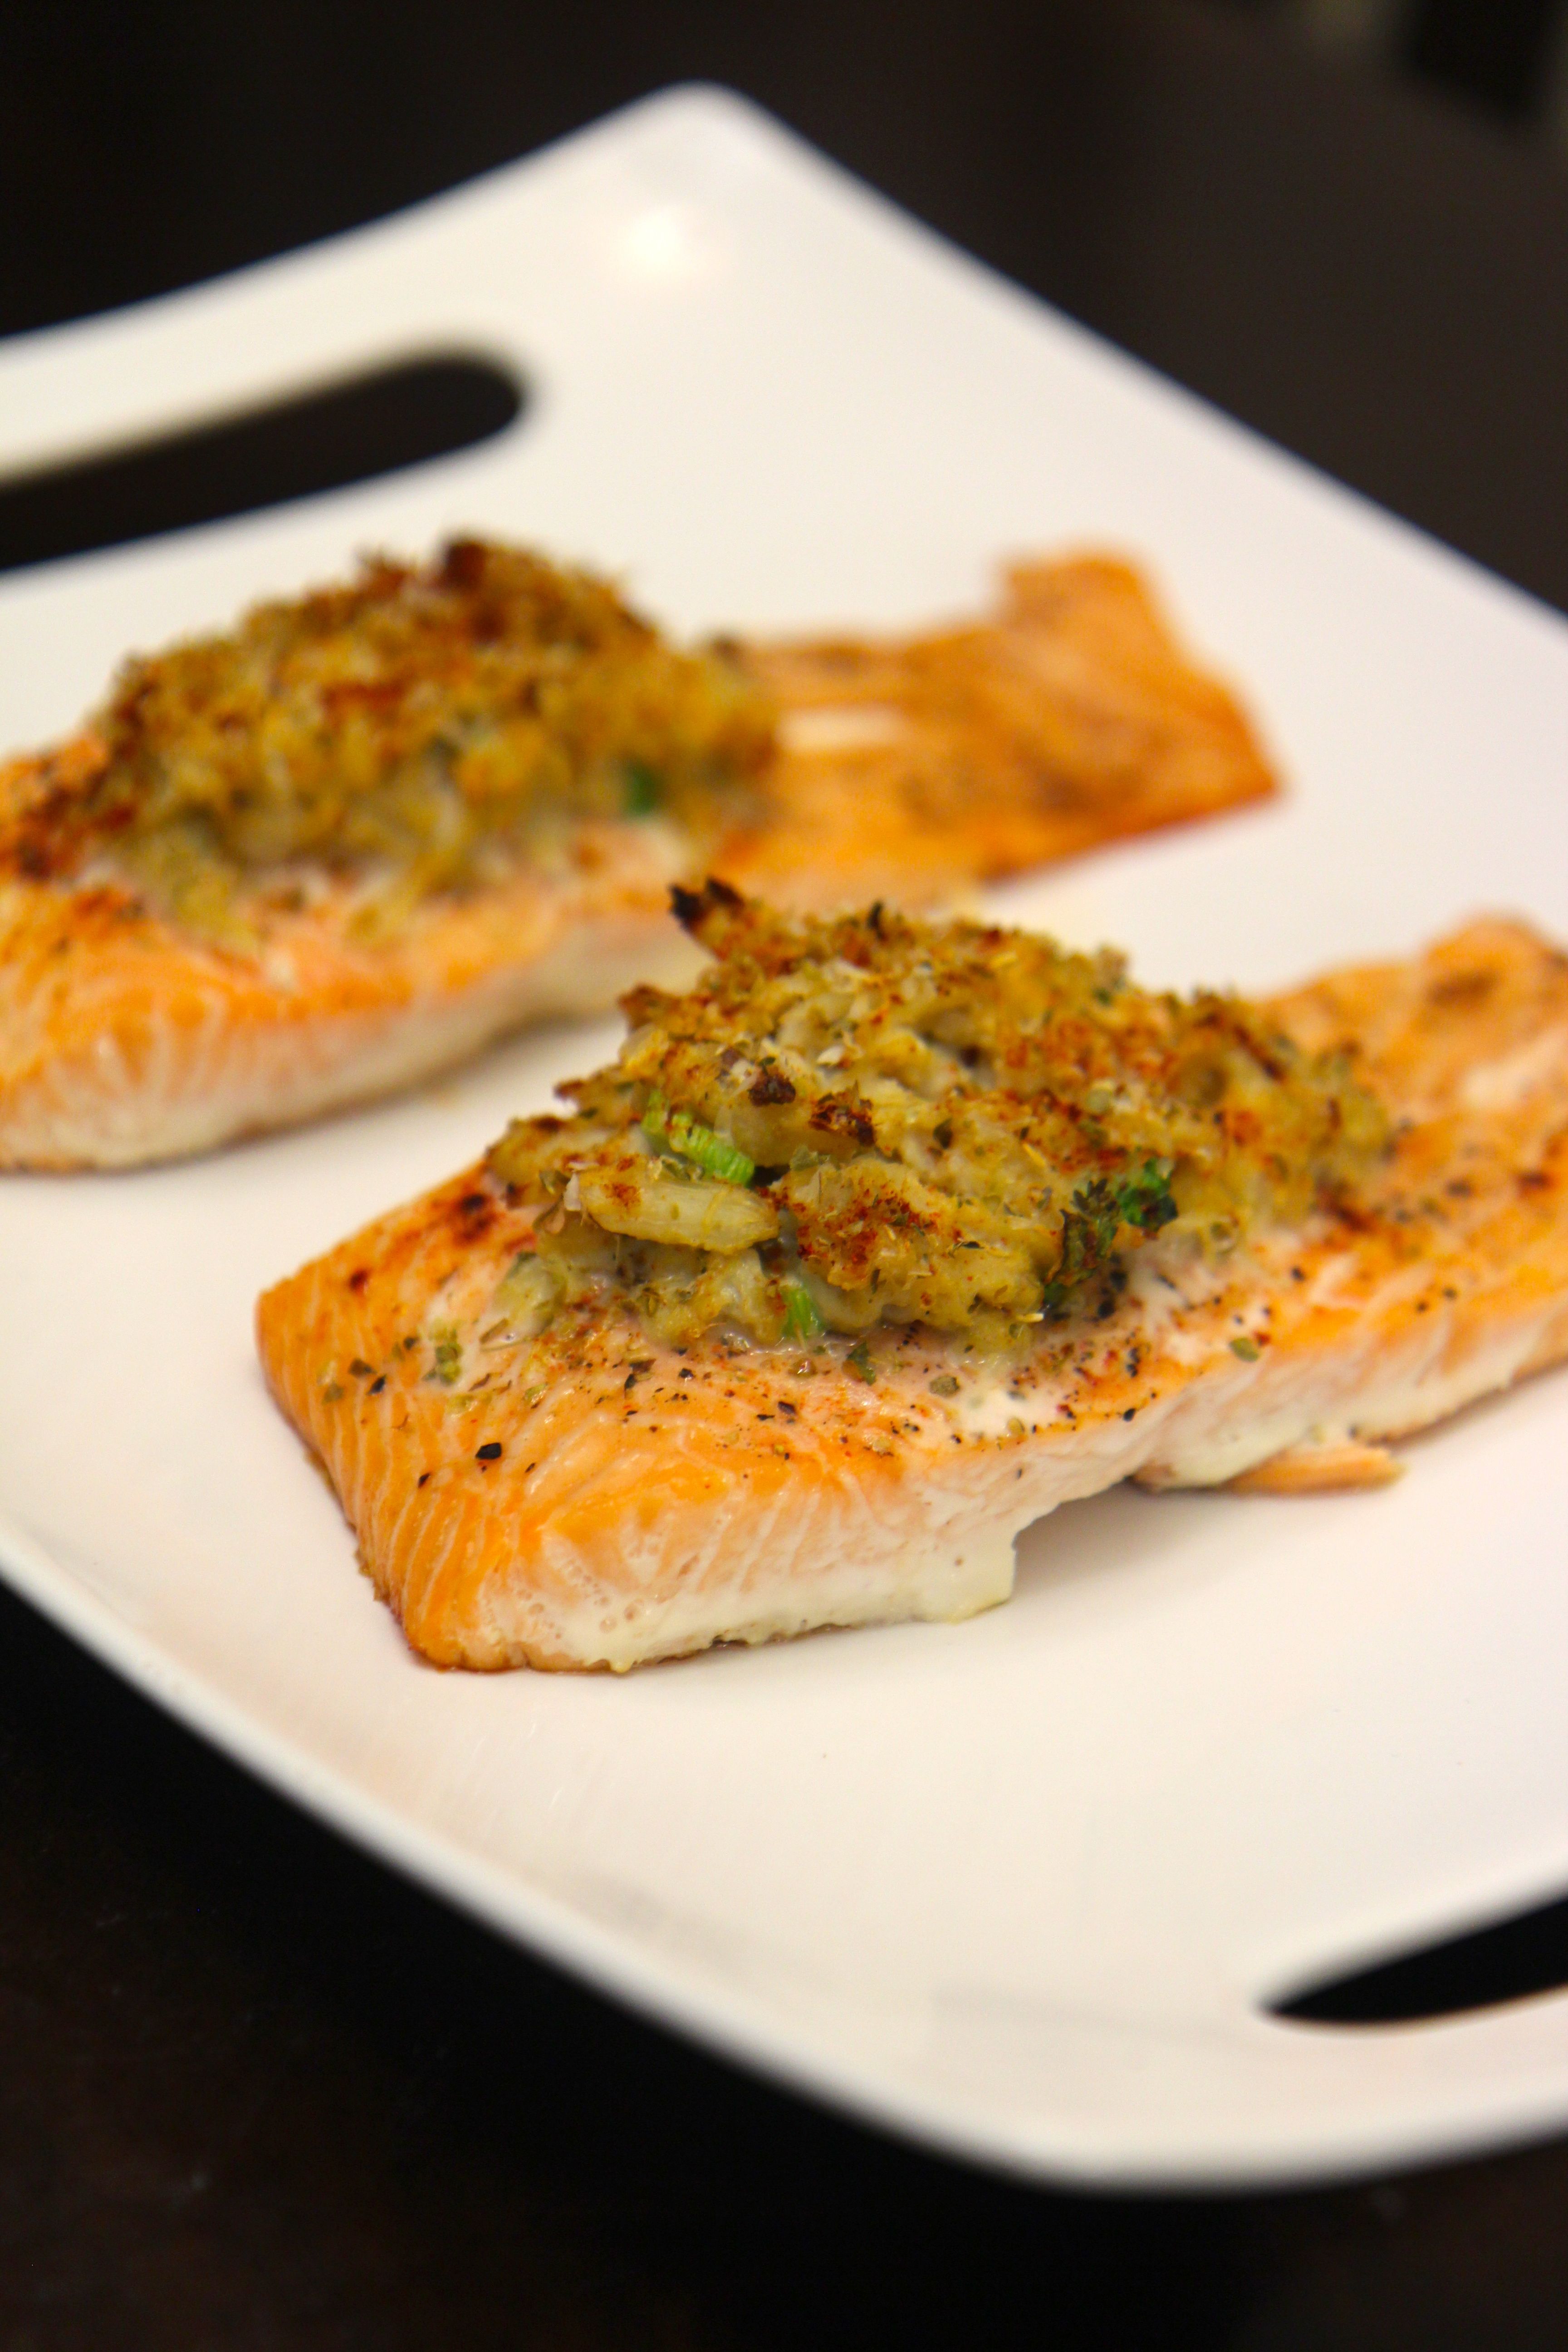 The salmon is flavorful and moist as well as a quick meal to prepare.